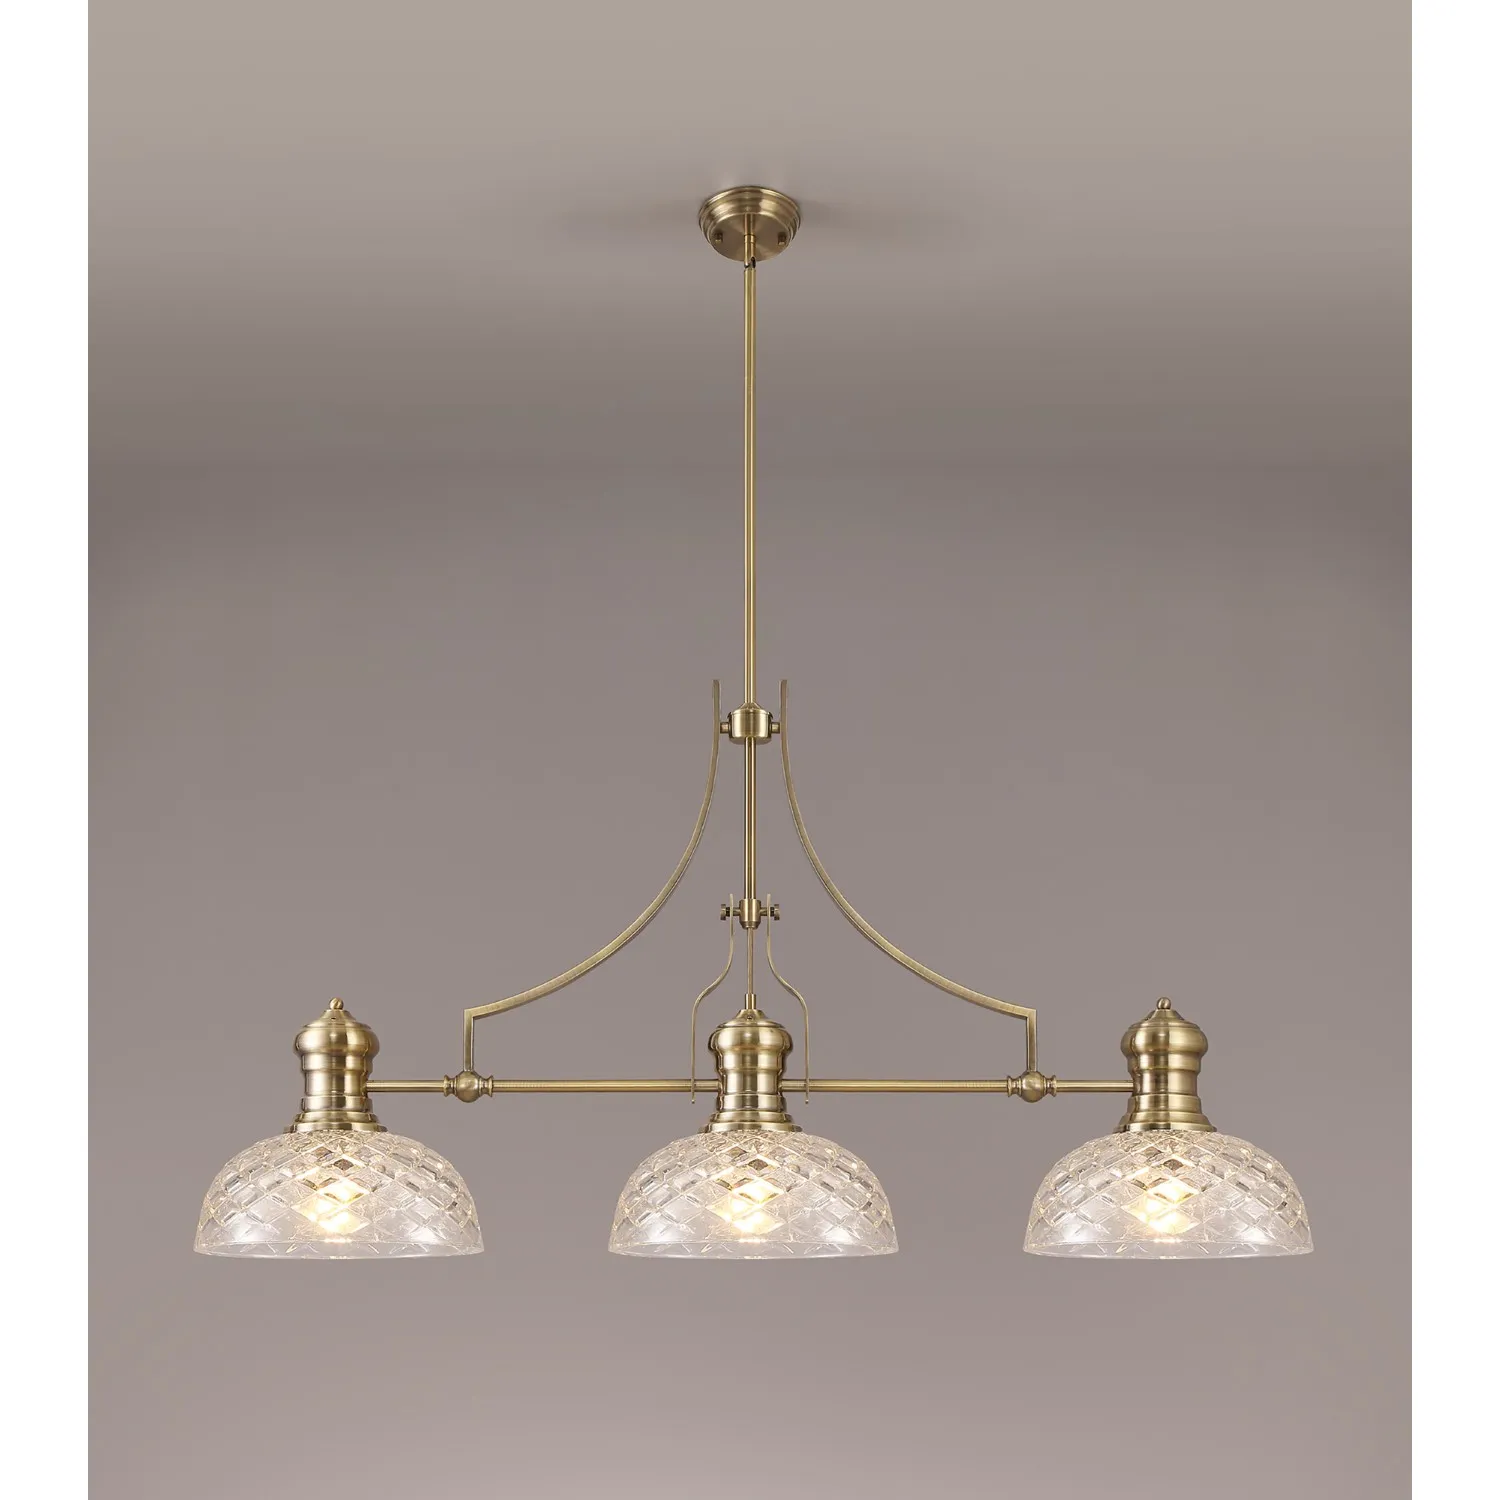 Sandy Linear Pendant With 30cm Flat Round Patterned Shade, 3 x E27, Antique Brass Clear Glass